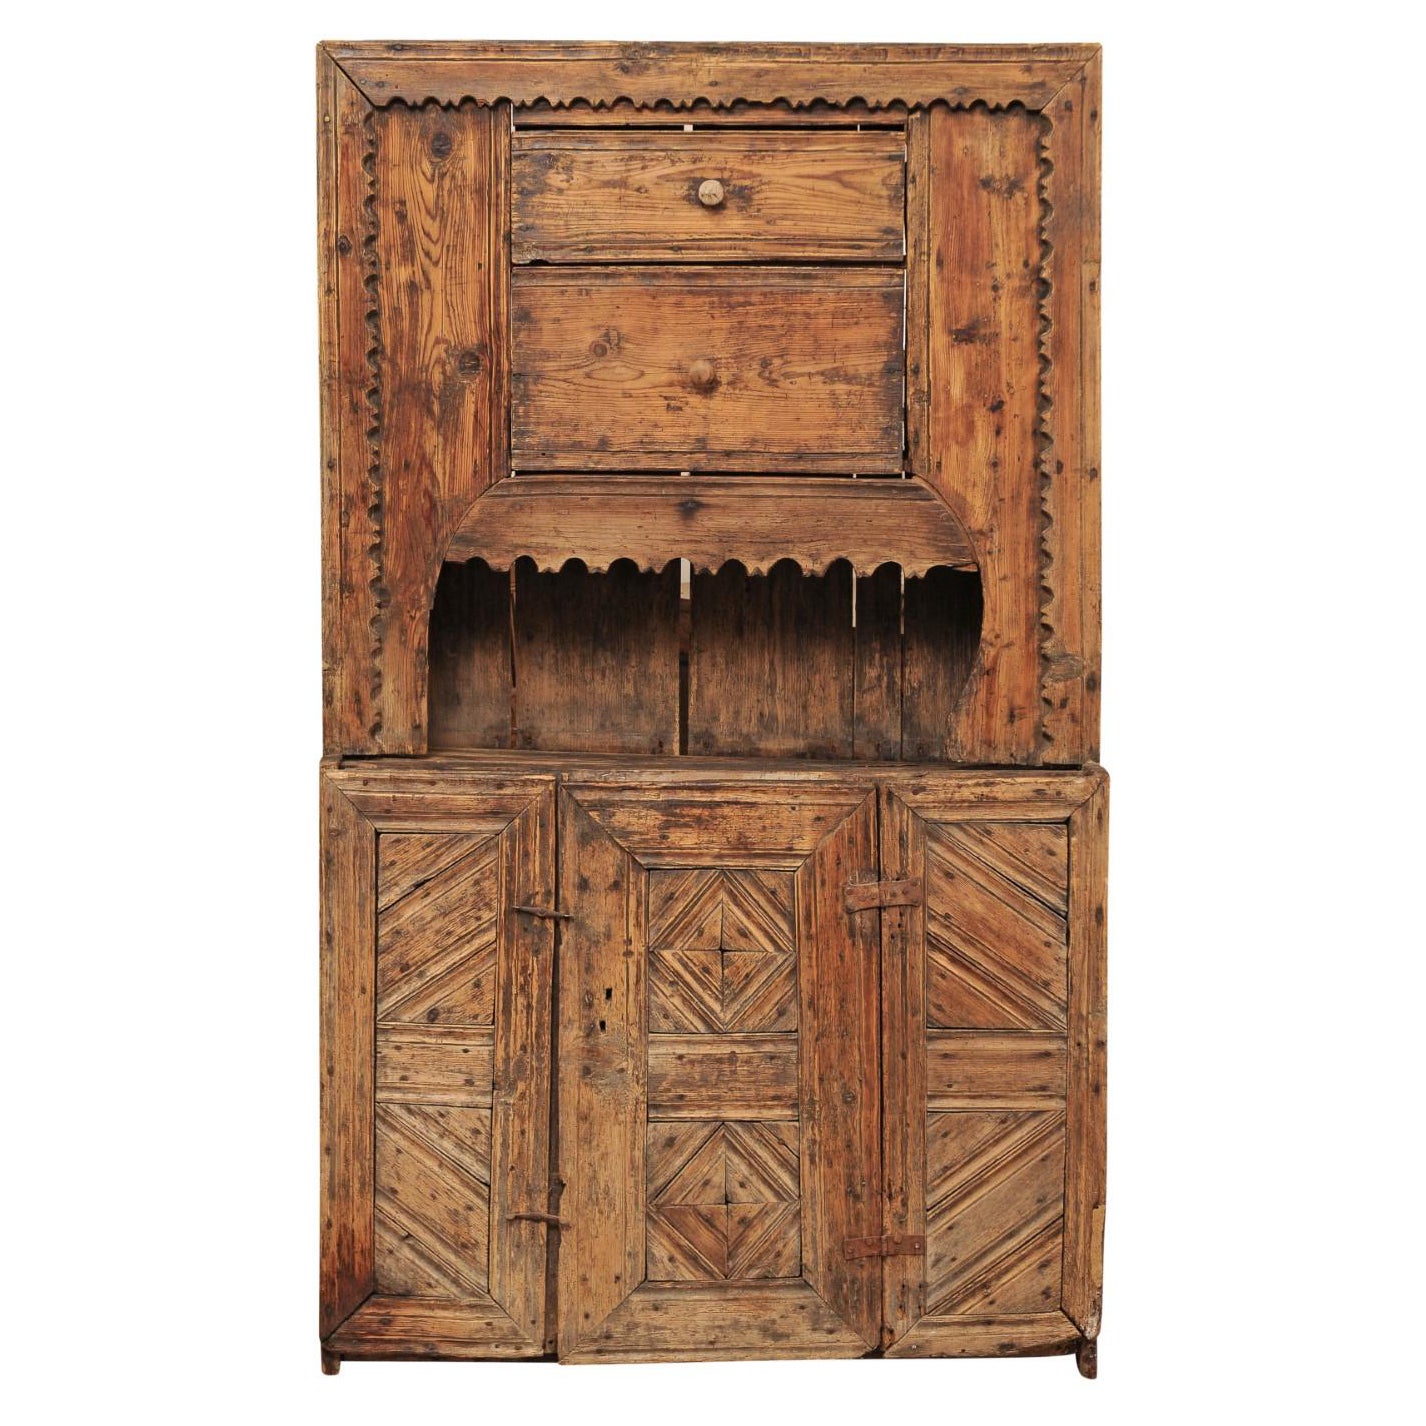 17th Century Spanish Pine Cabinet with 2 Drawers & Open Shelf above Cabinet Door For Sale